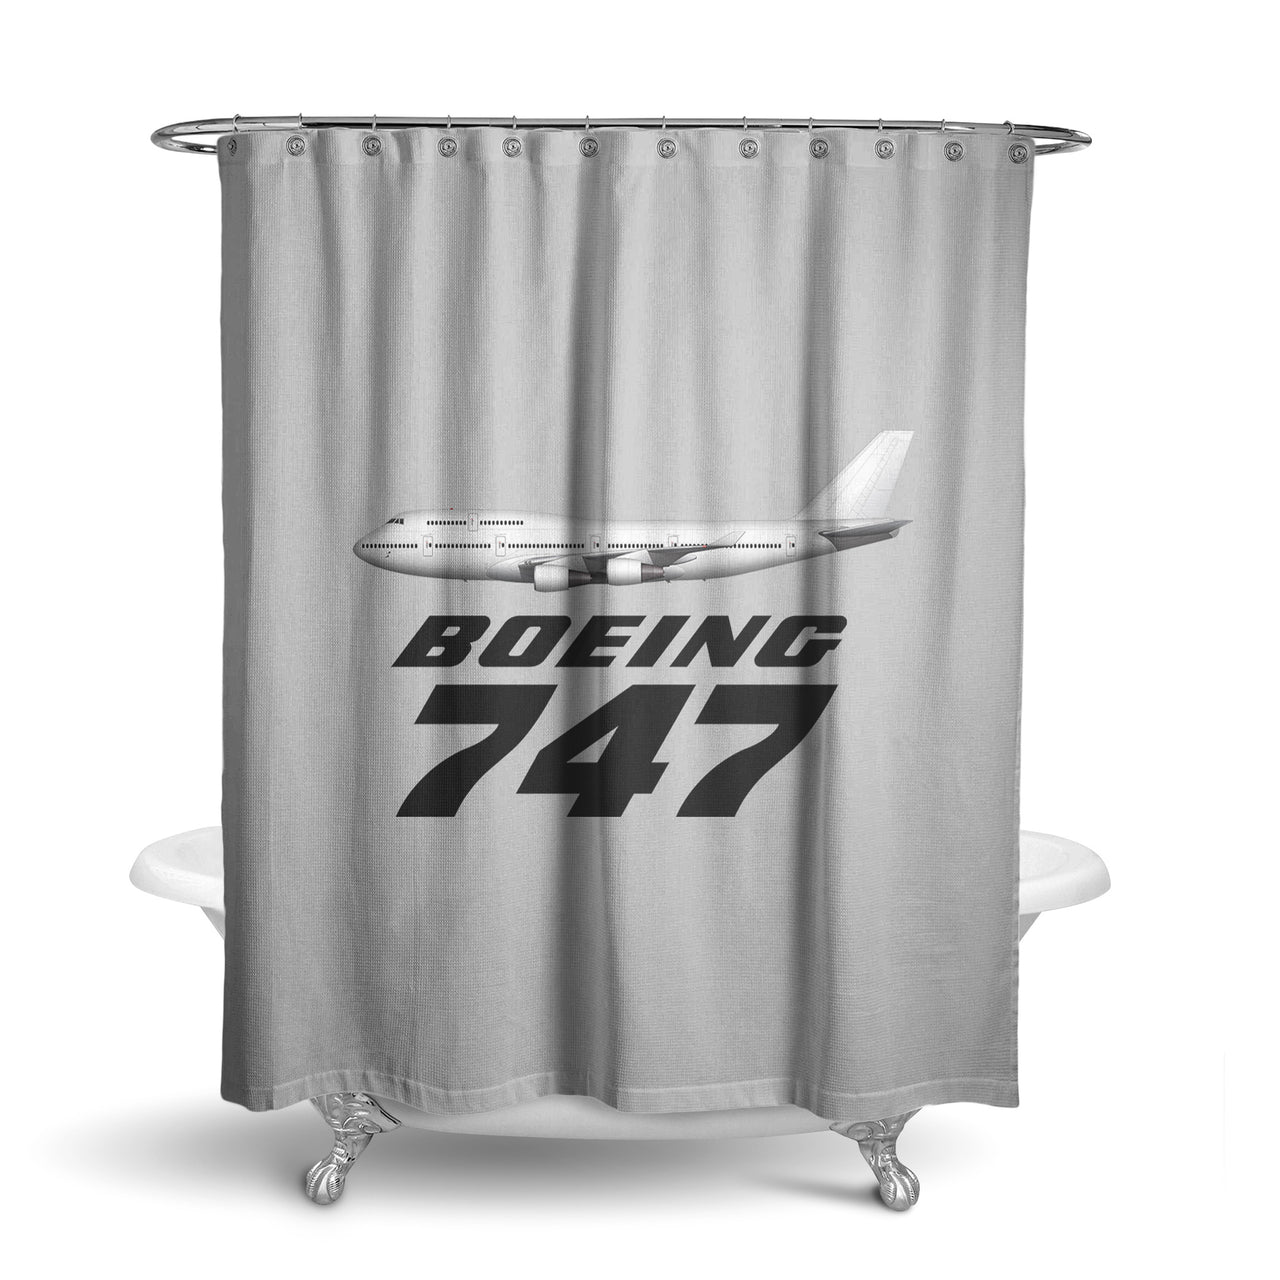 The Boeing 747 Designed Shower Curtains